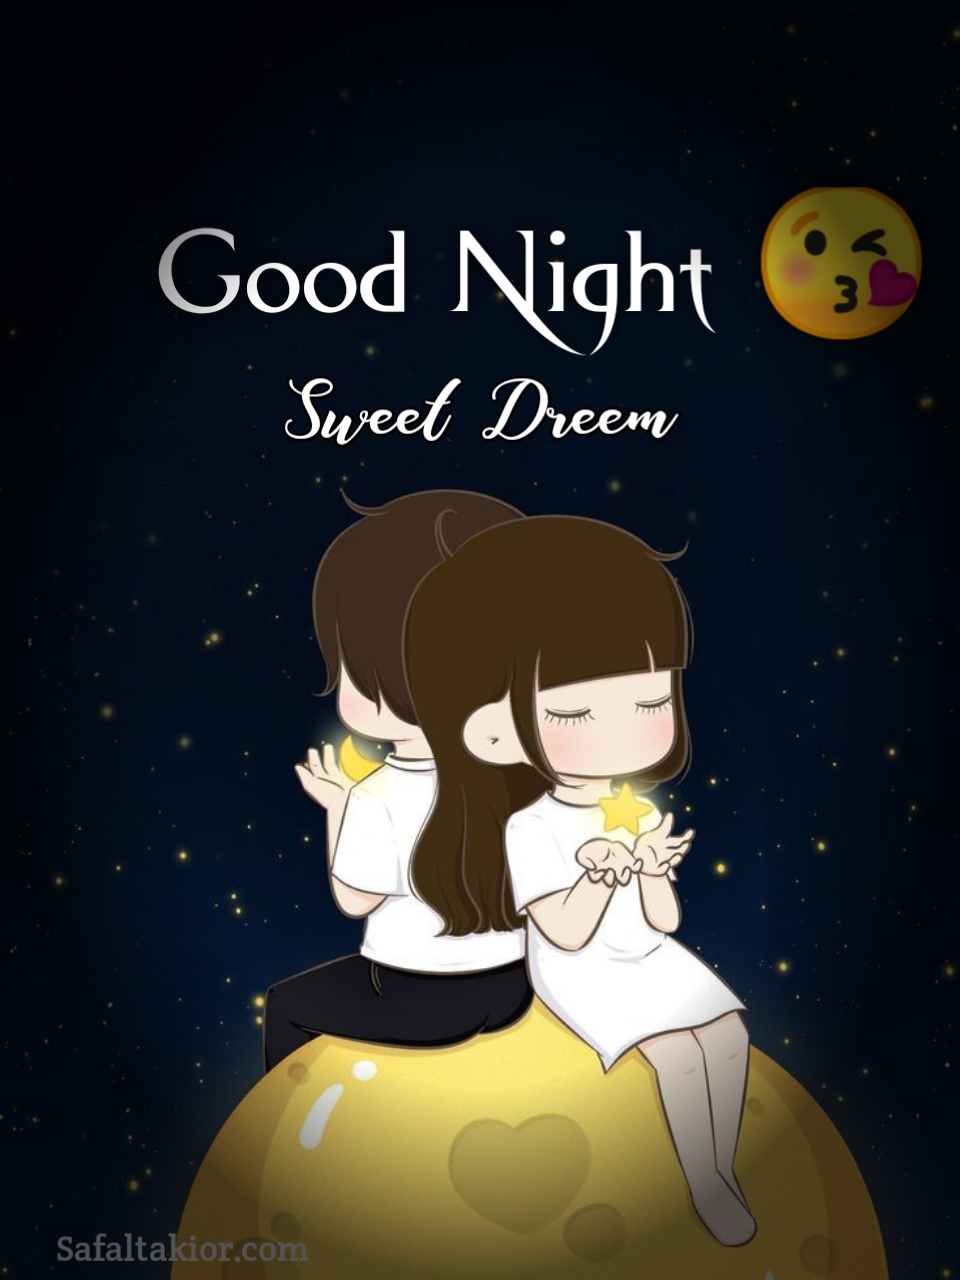  good night message images free download